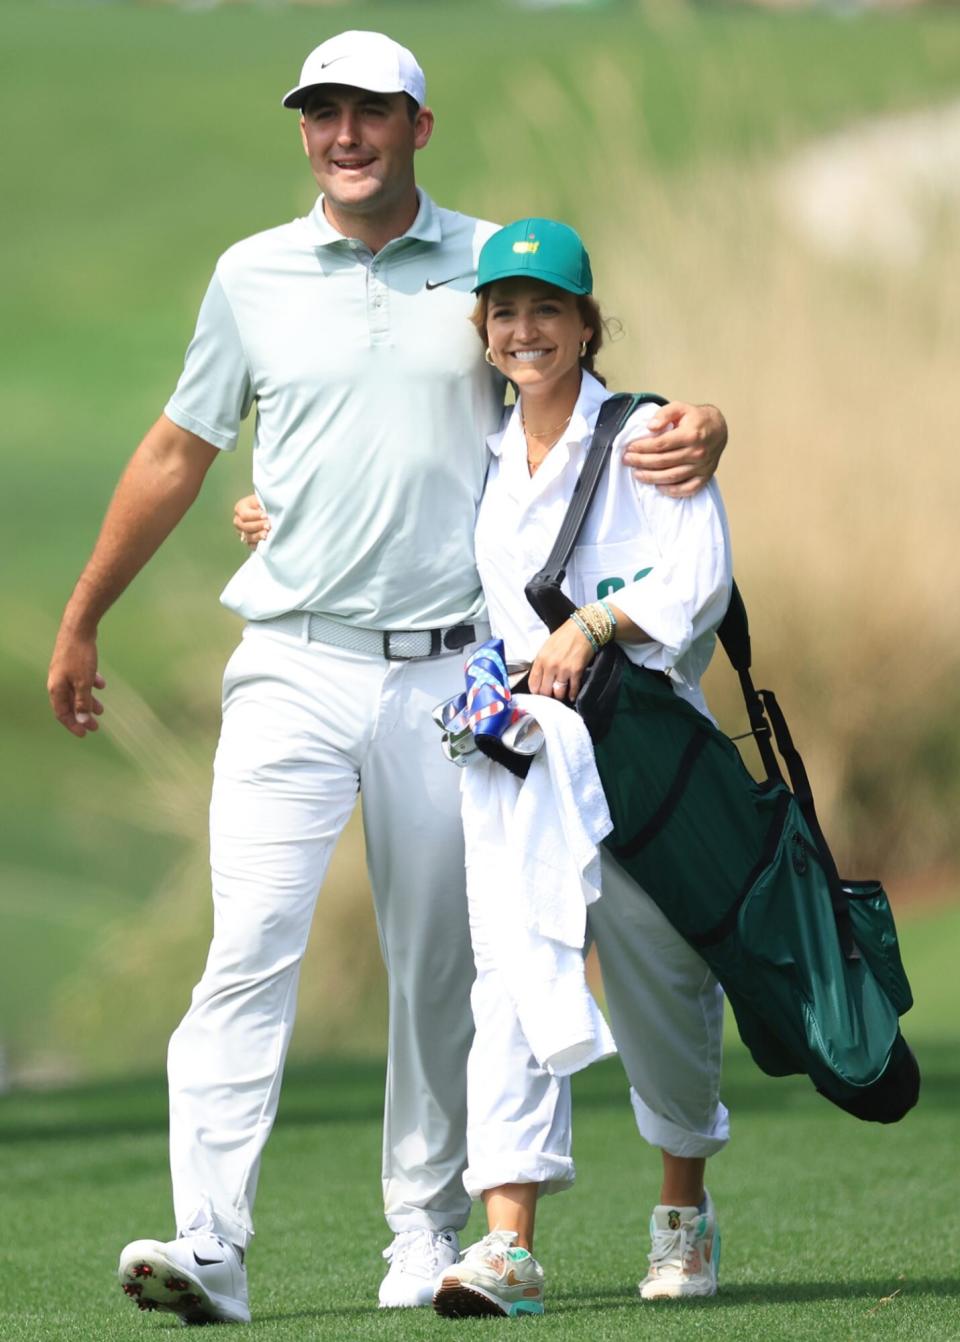 Scottie Scheffler of the United States and wife Meredith Scudder during the Par Three Contest prior to the Masters at Augusta National Golf Club on April 06, 2022 in Augusta, Georgia